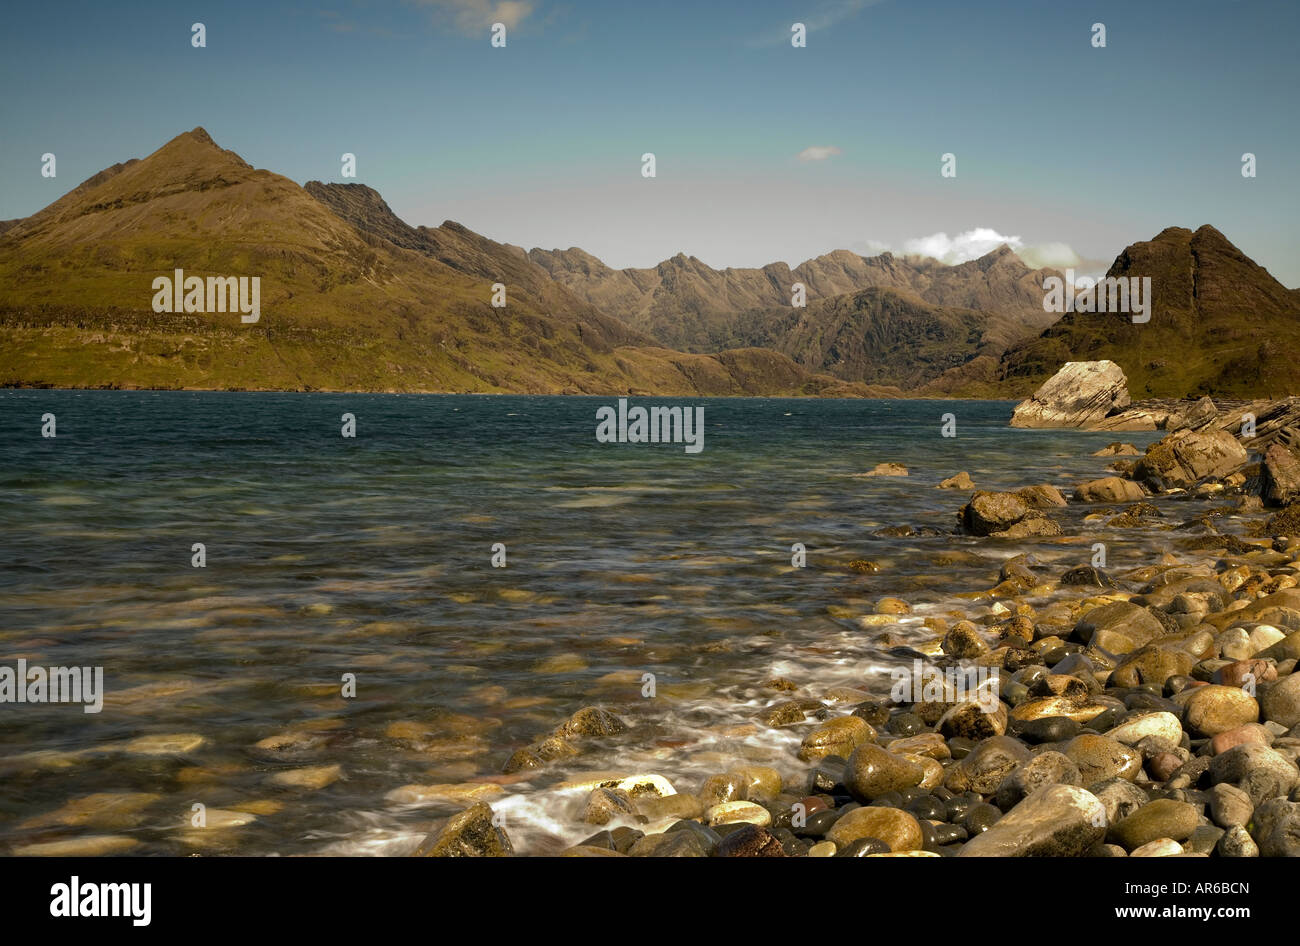 The Cuillin mountains from the boulder strewn shoreline of Loch Scavaig near Elgol on the Isle of Skye. Stock Photo